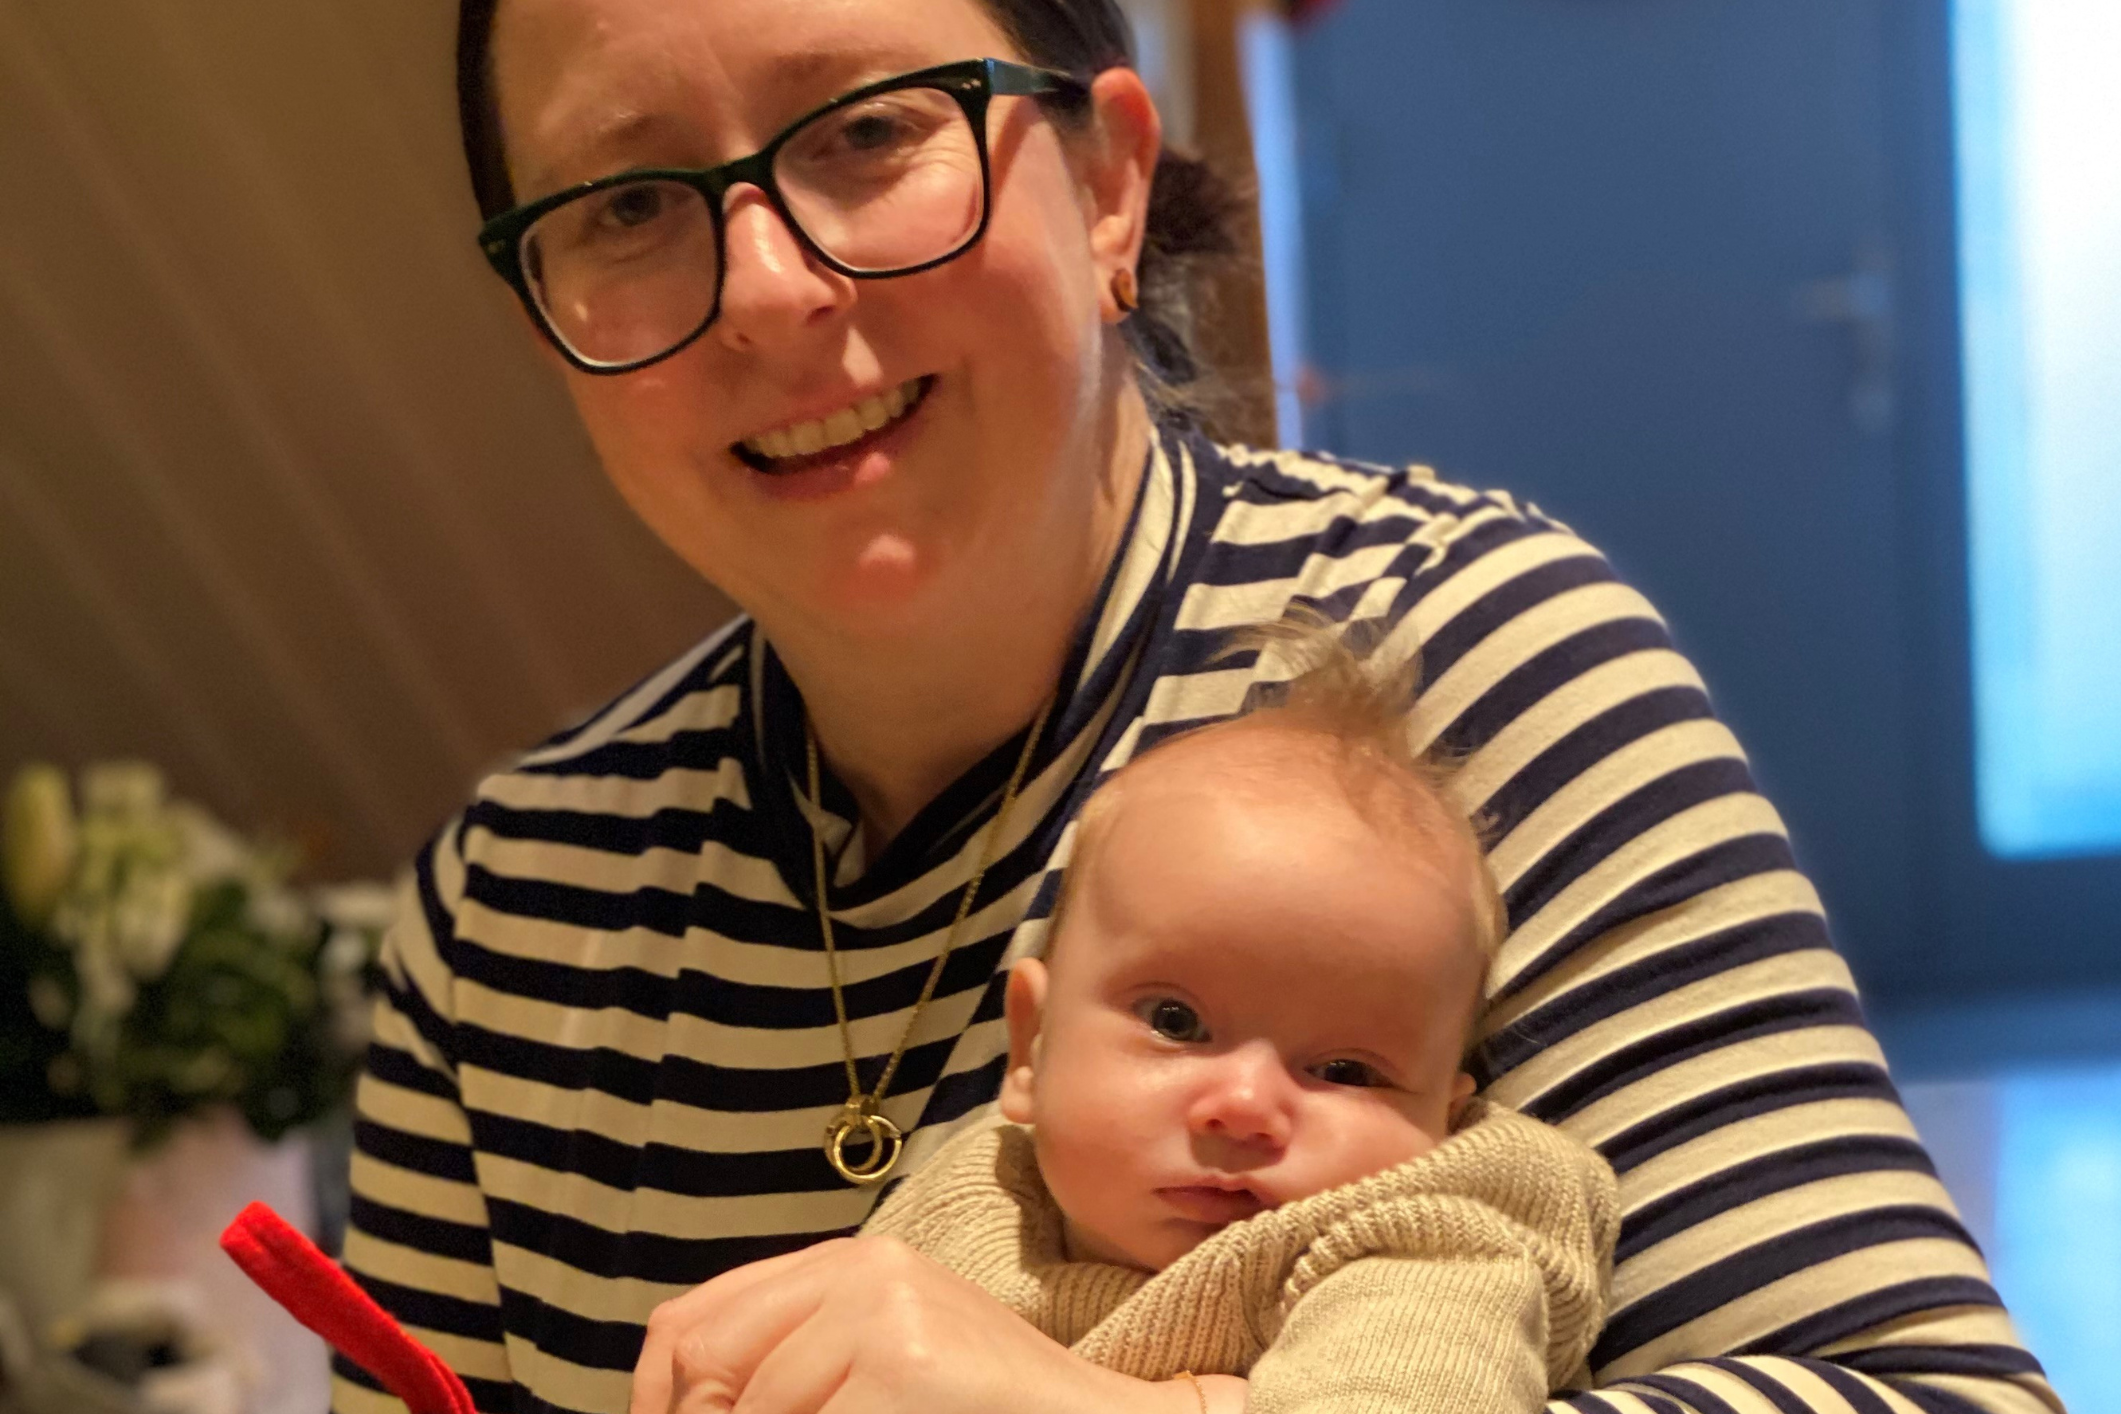 Smiling mom wearing a black and white striped long sleeve top holding her baby wearing a tan sweater.